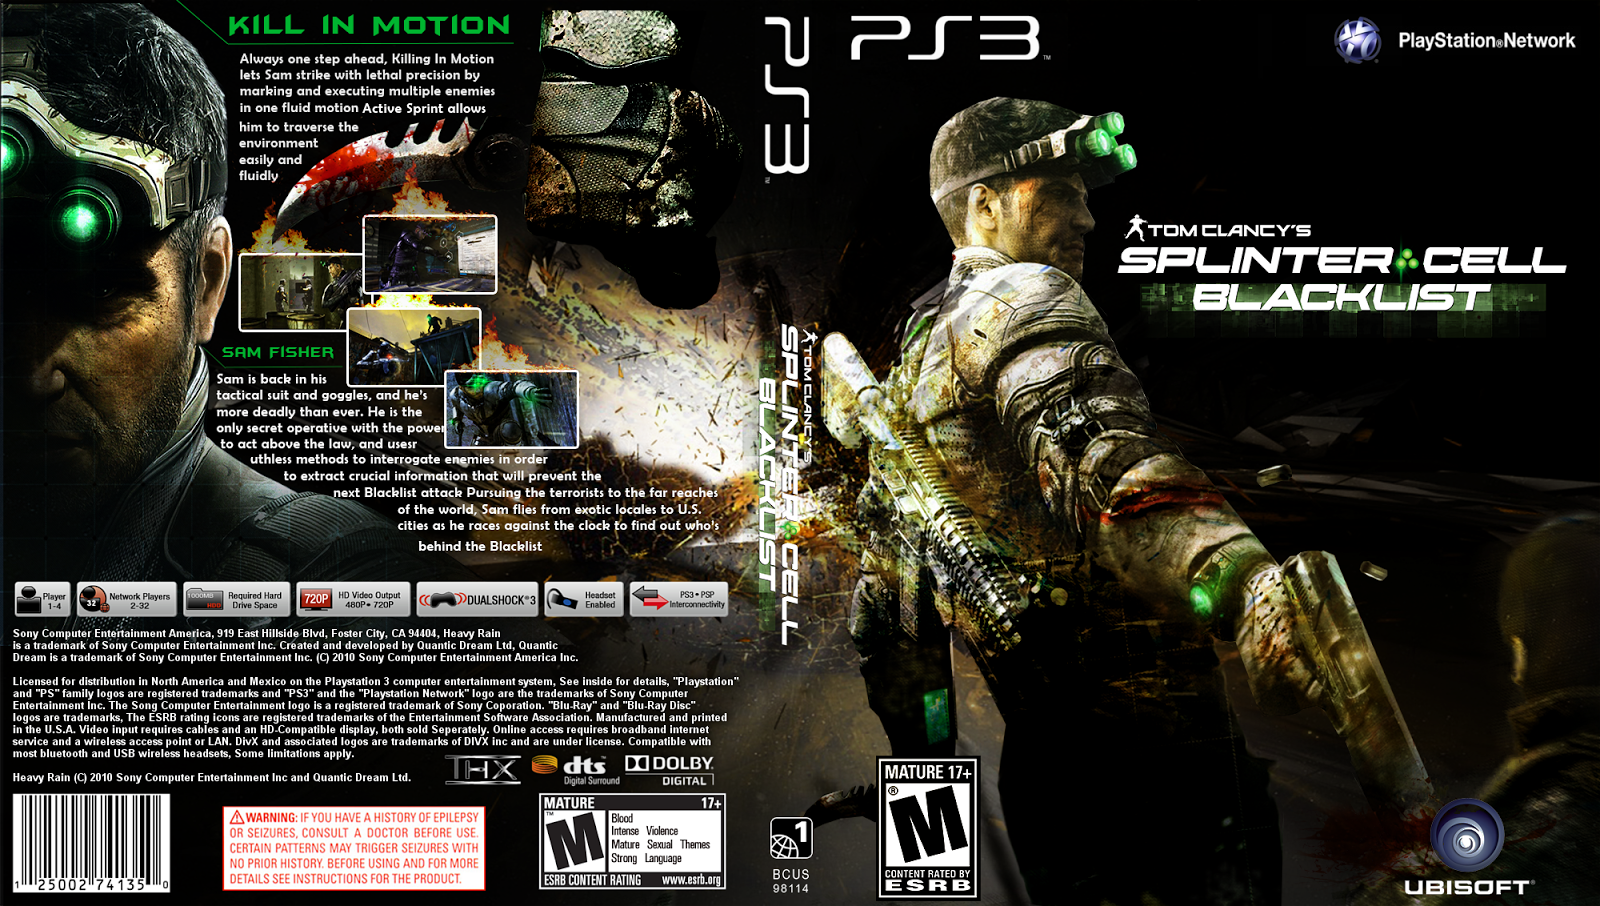 Cell ps3. Tom Clancy's Splinter Cell ps3. Sony PLAYSTATION 3 Splinter Cell. Sprinter Cell Blacklist ps3. Tom Clancy's Splinter Cell: Blacklist ps3.